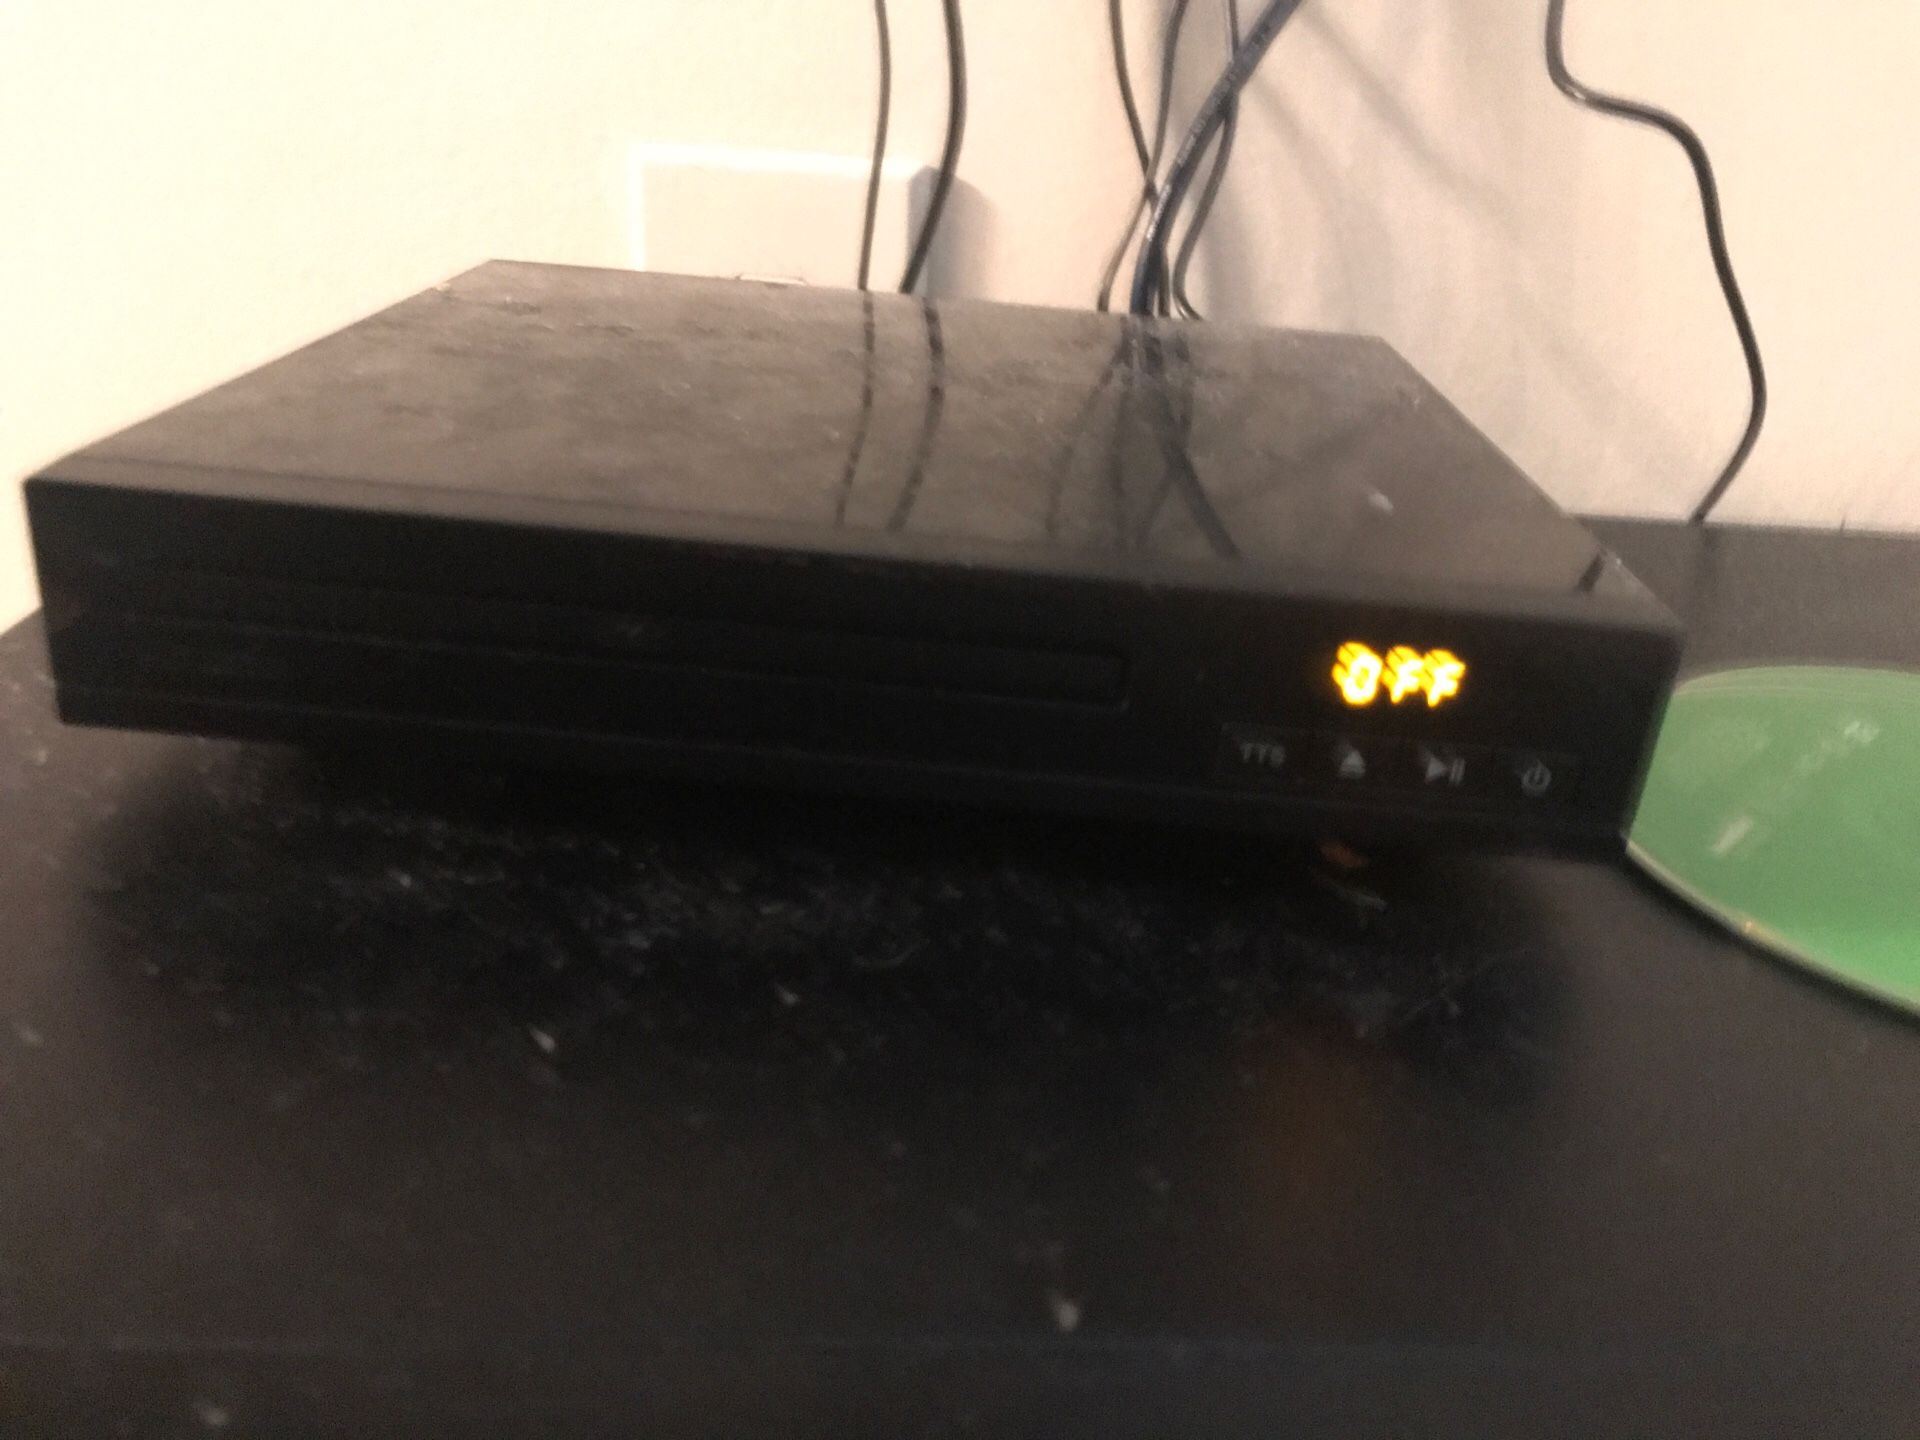 Small DVD player